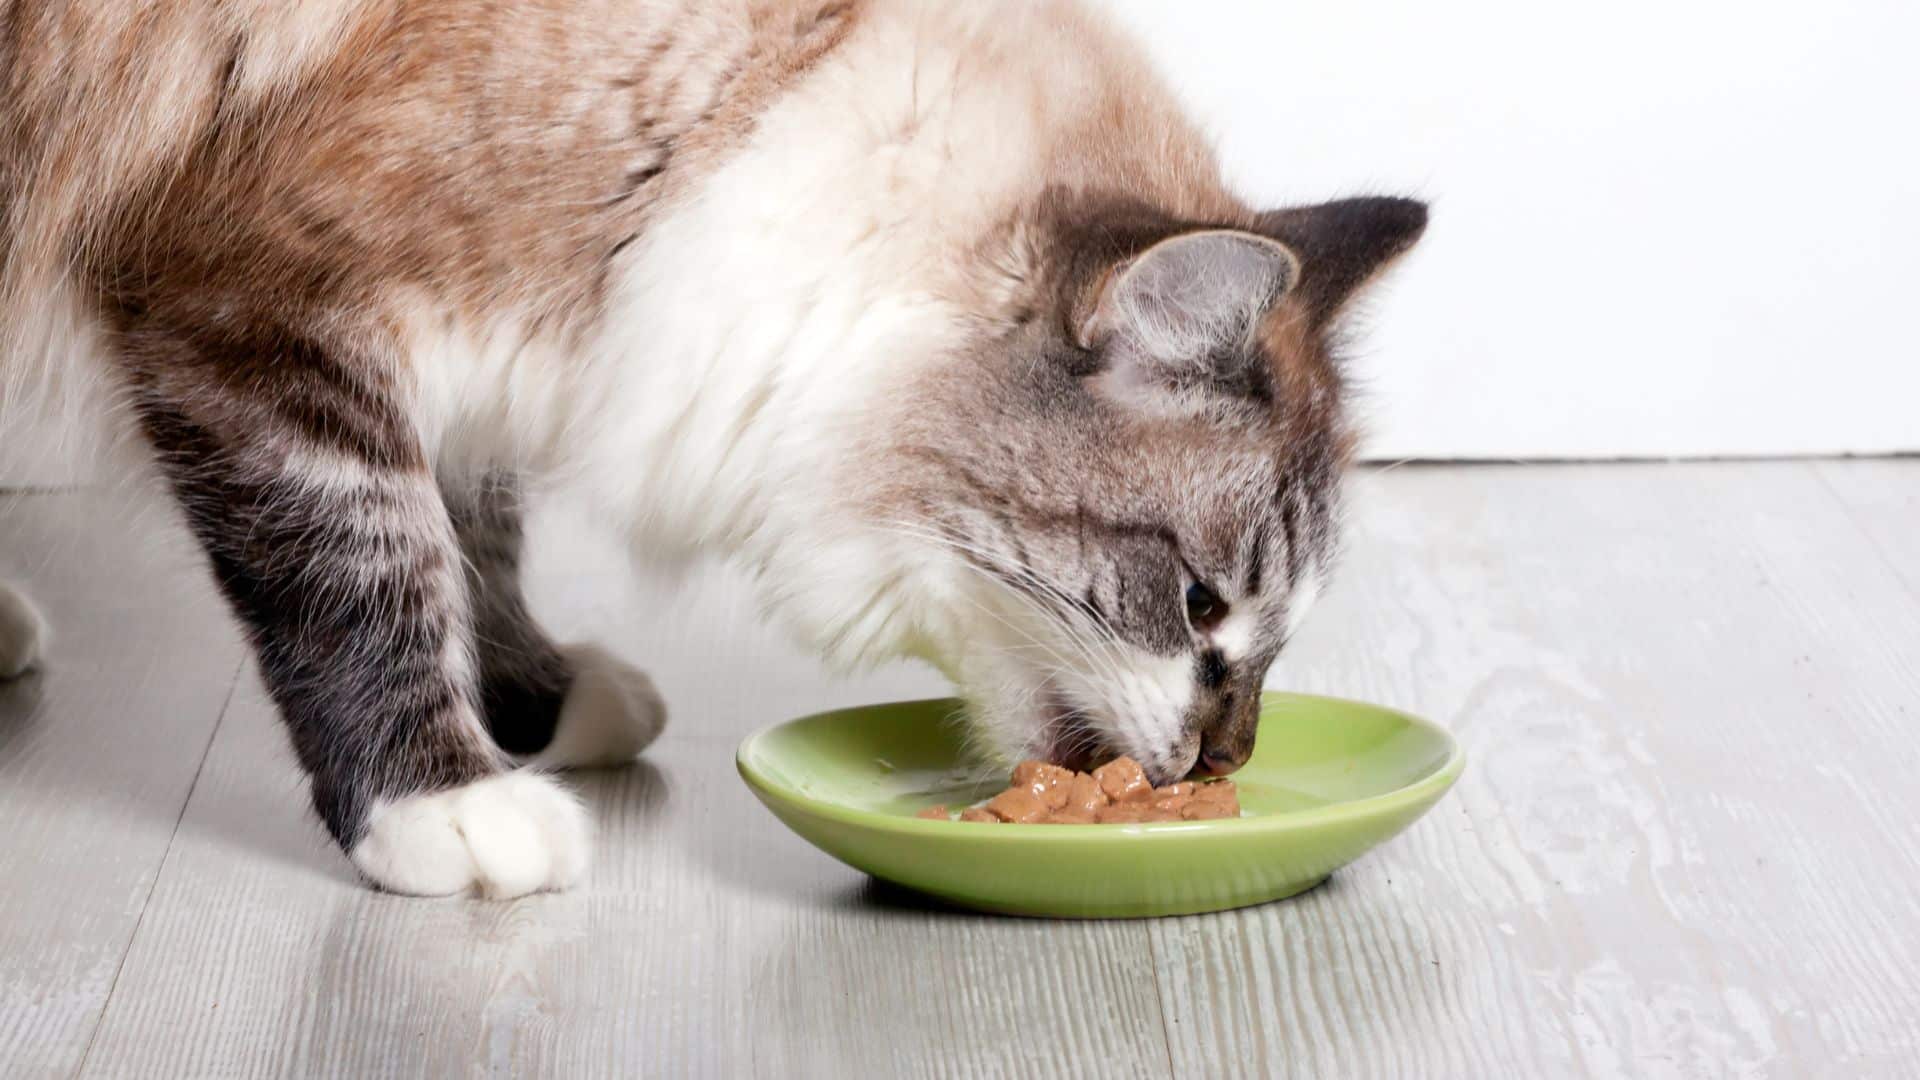 Bread has not nutritional benefit and can cause your cat a gastrointestinal upset